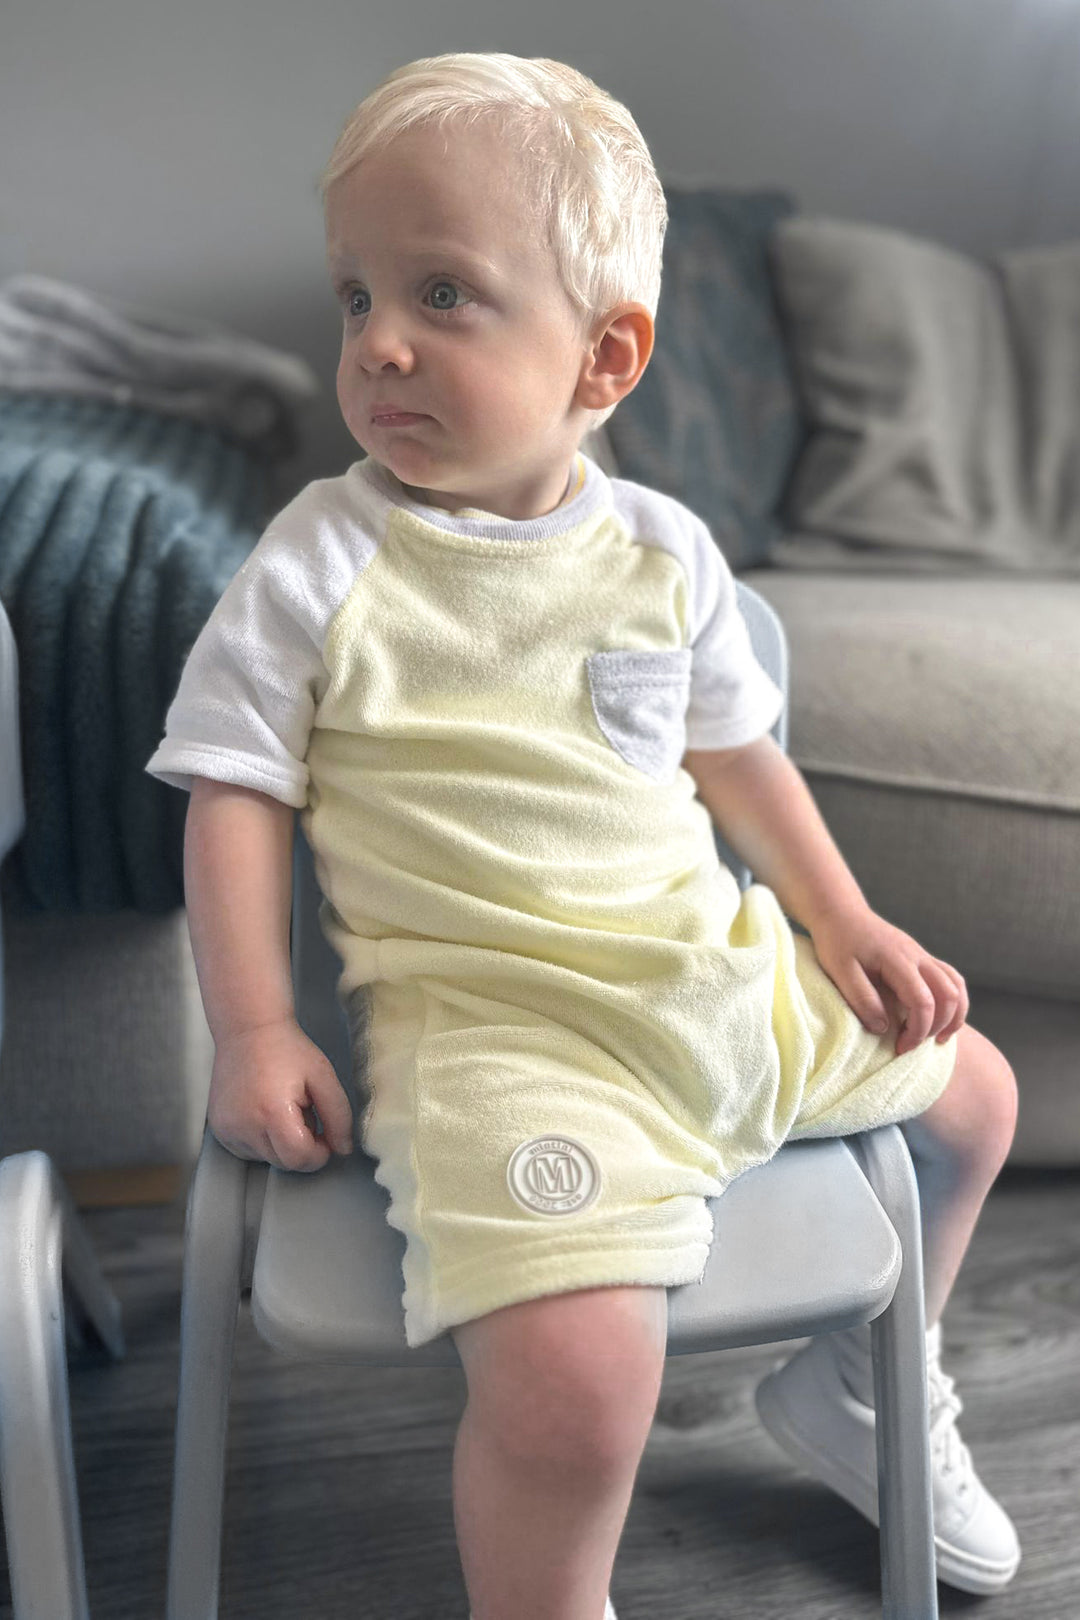 Mintini Baby "August" Lemon Terry Towelling Romper | Millie and John